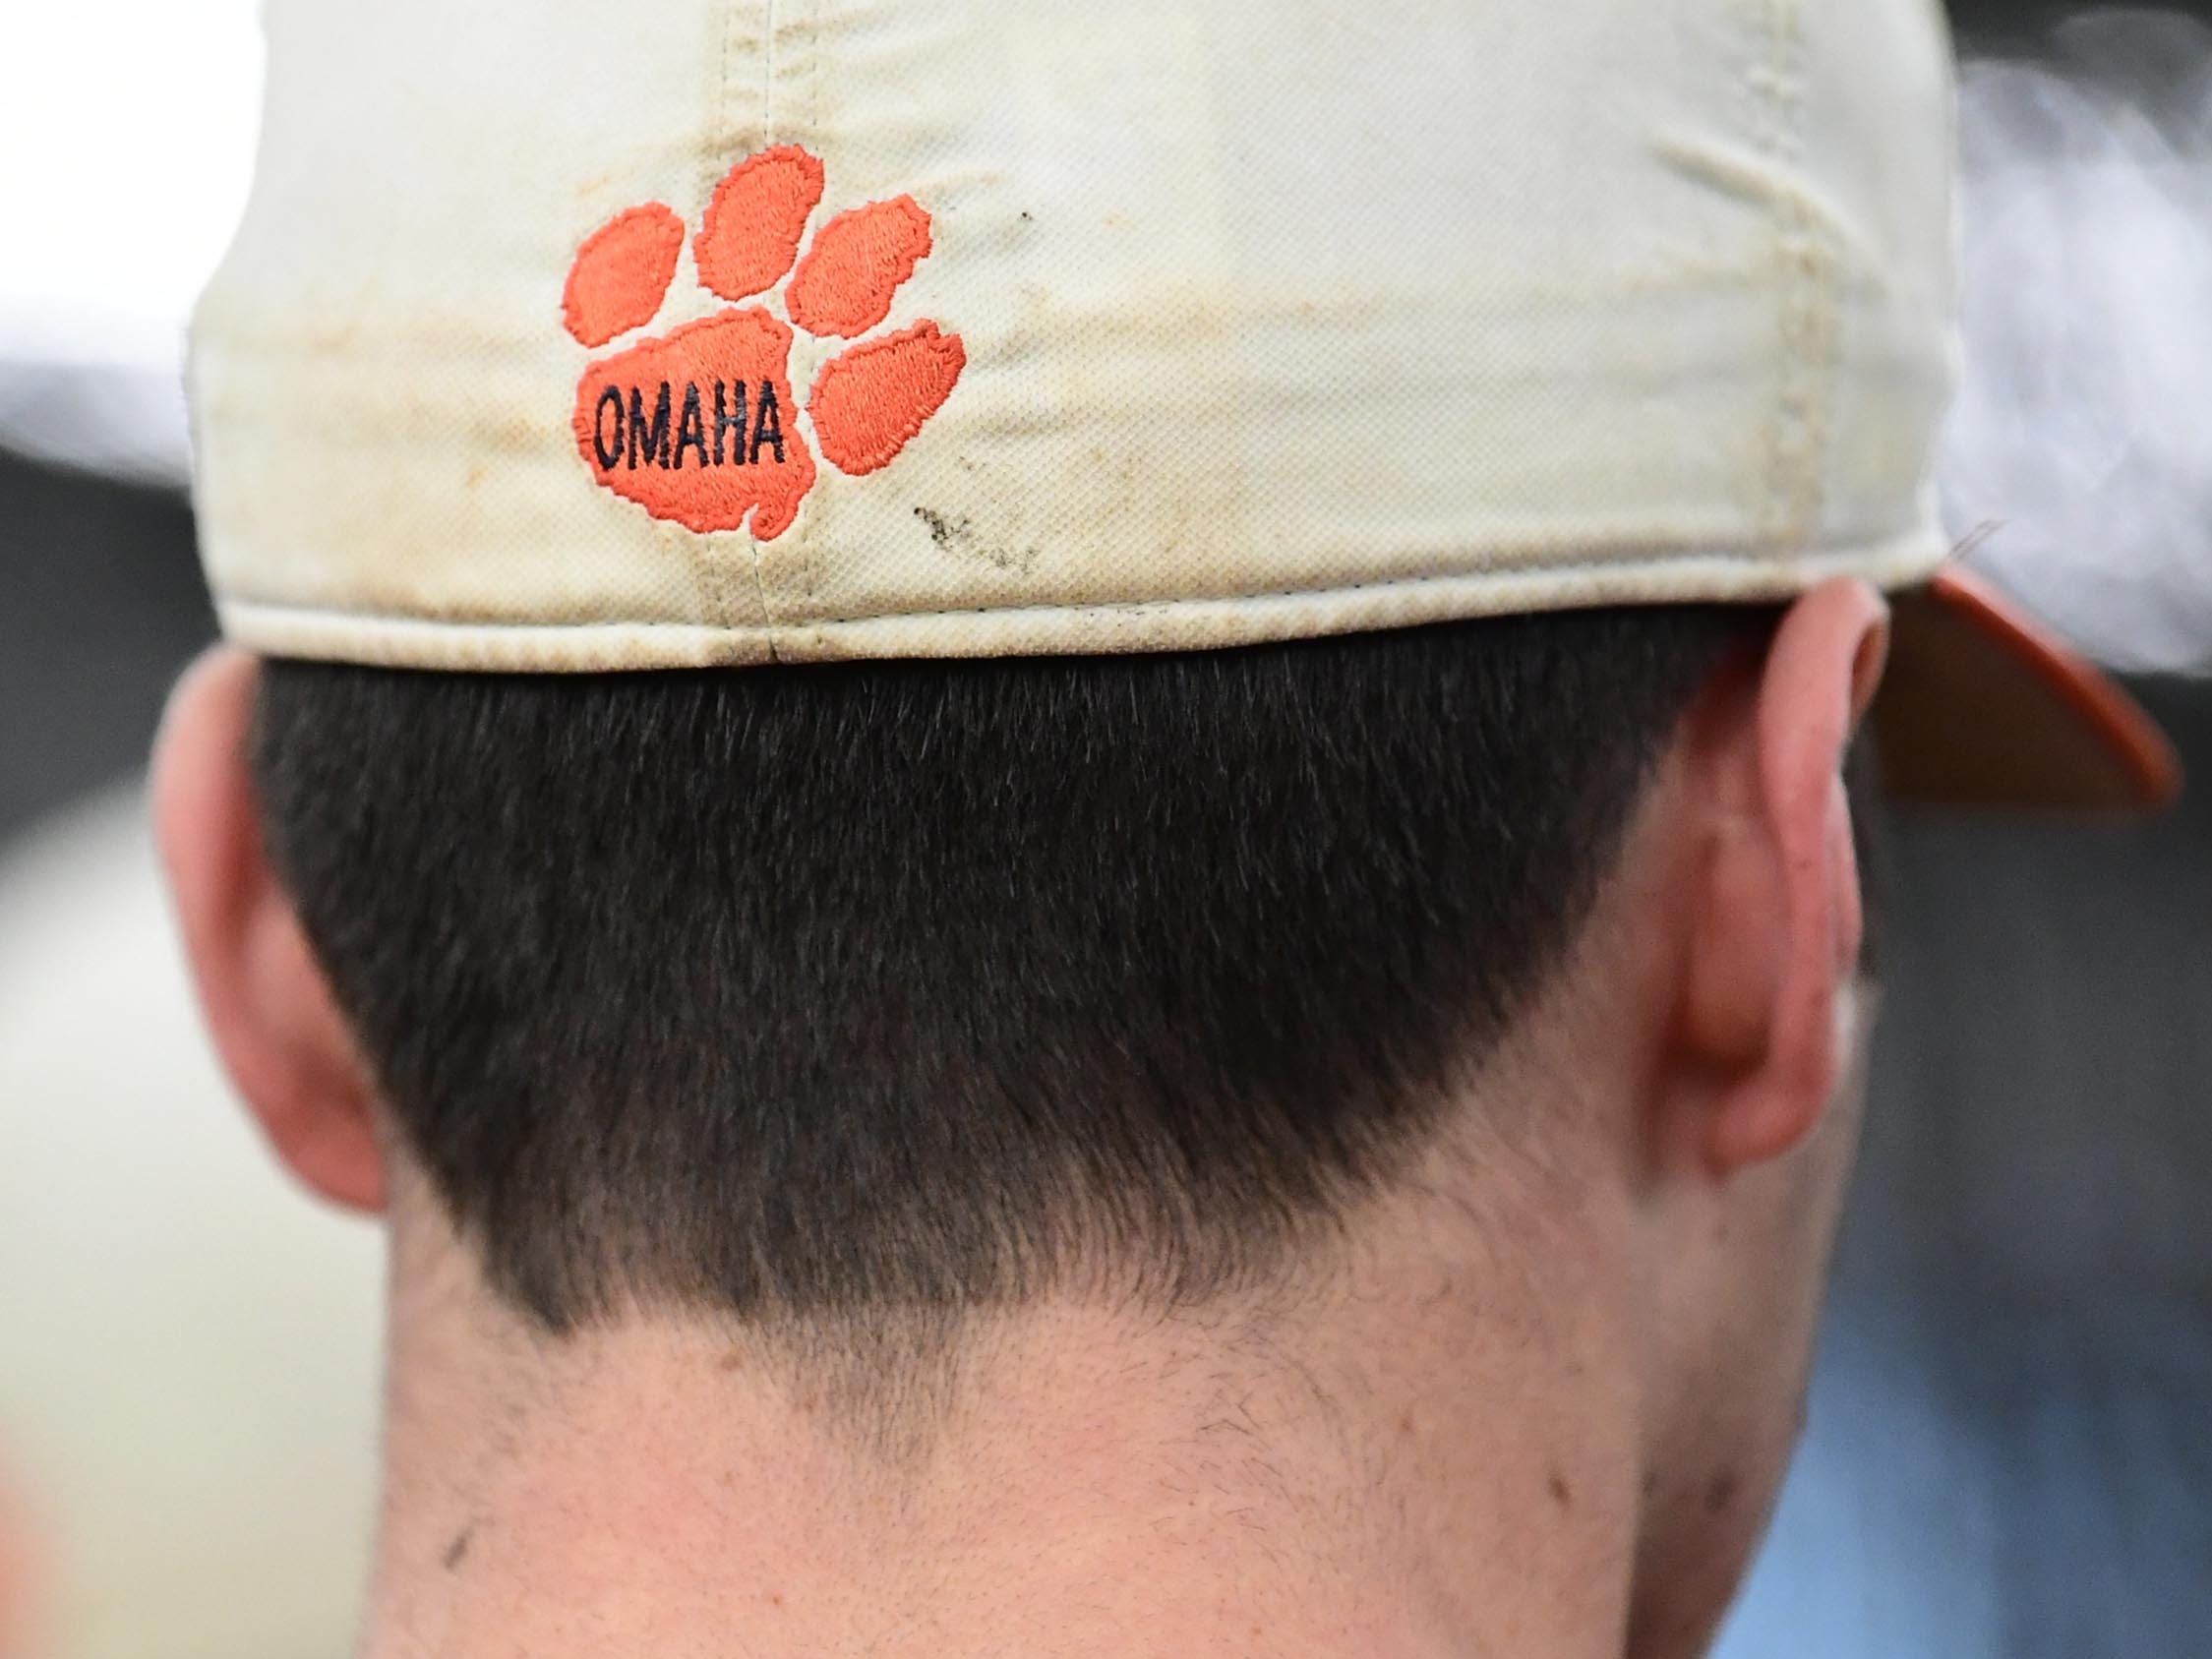 Clemson sophomore pitcher Davis Sharpe wears his hat with "Omaha" on the back, during batting practice at the first official team Spring practice at Doug Kingsmore Stadium in Clemson Friday, January 24, 2020.